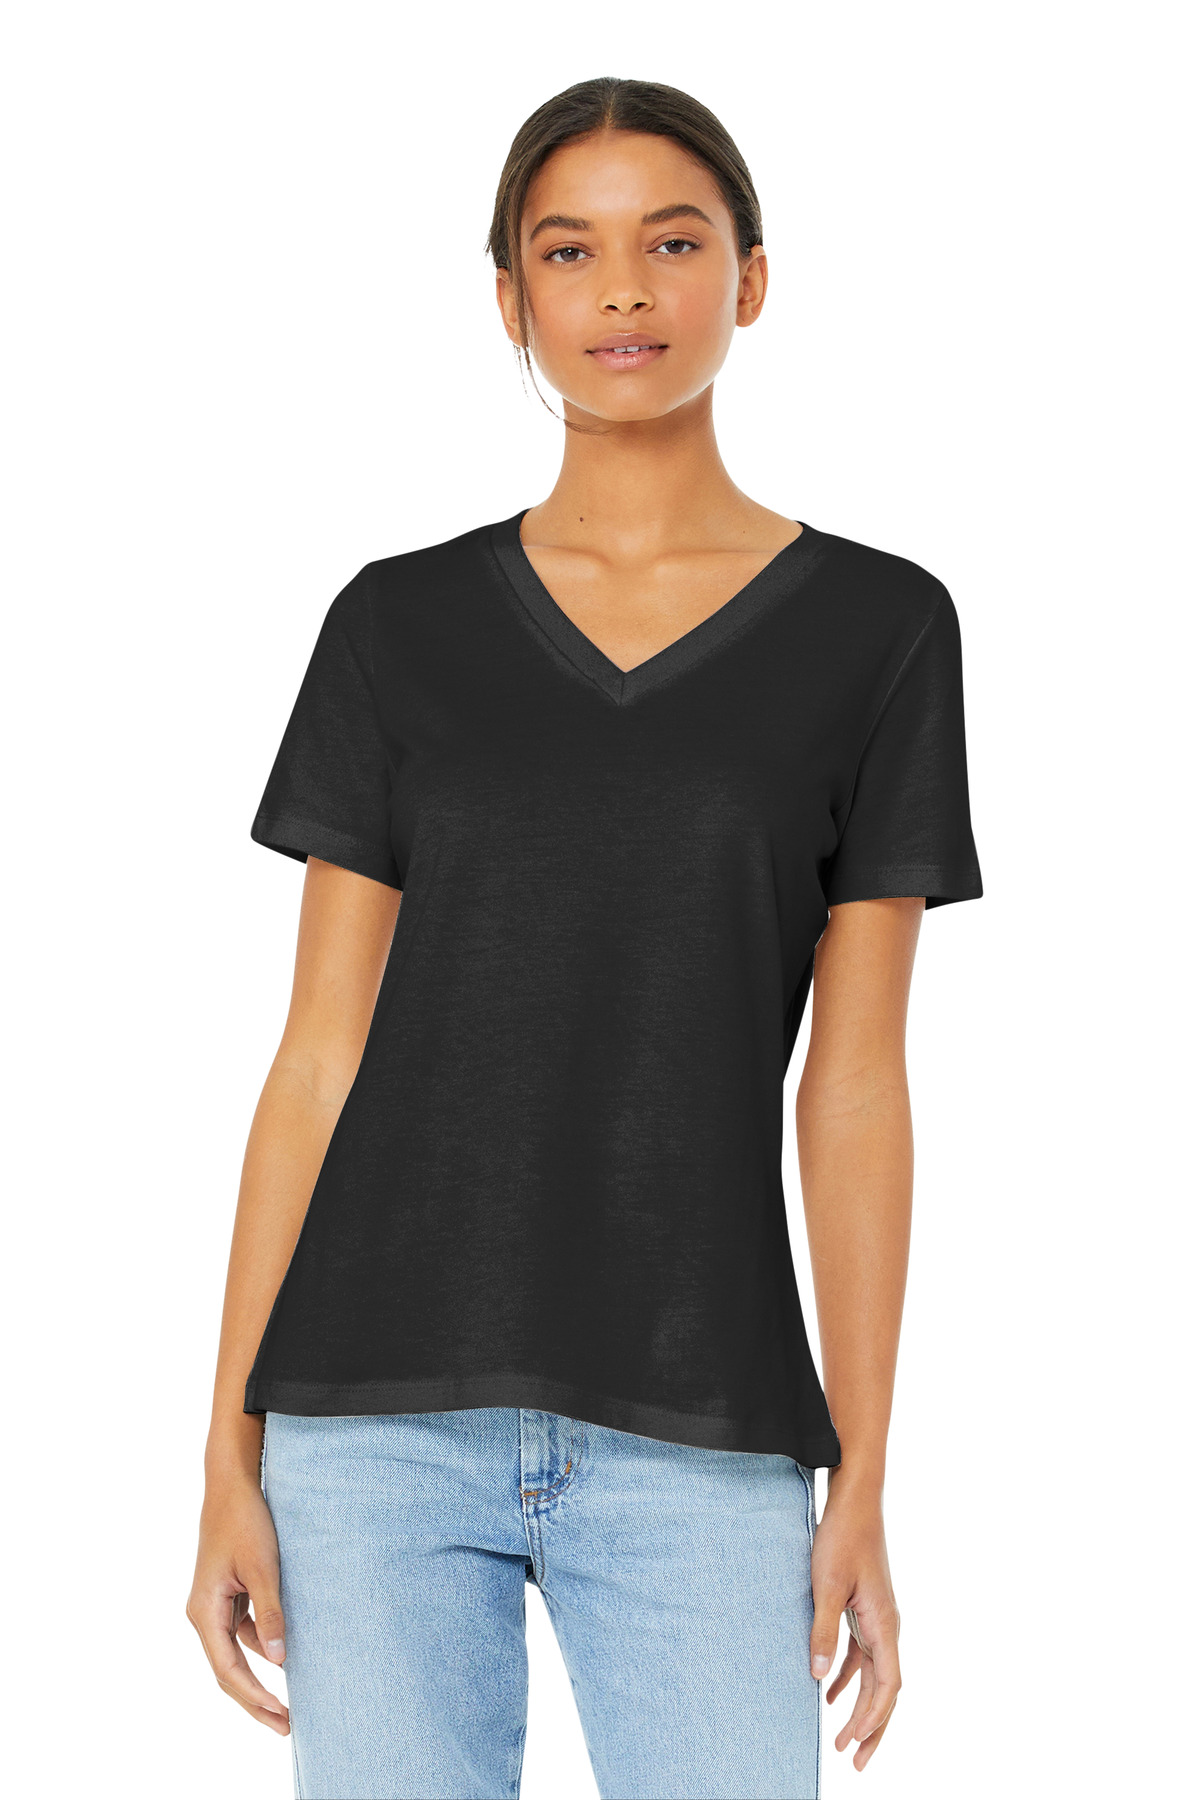 BELLA+CANVAS  Womens Relaxed Jersey Short Sleeve V-Neck Tee. BC6405